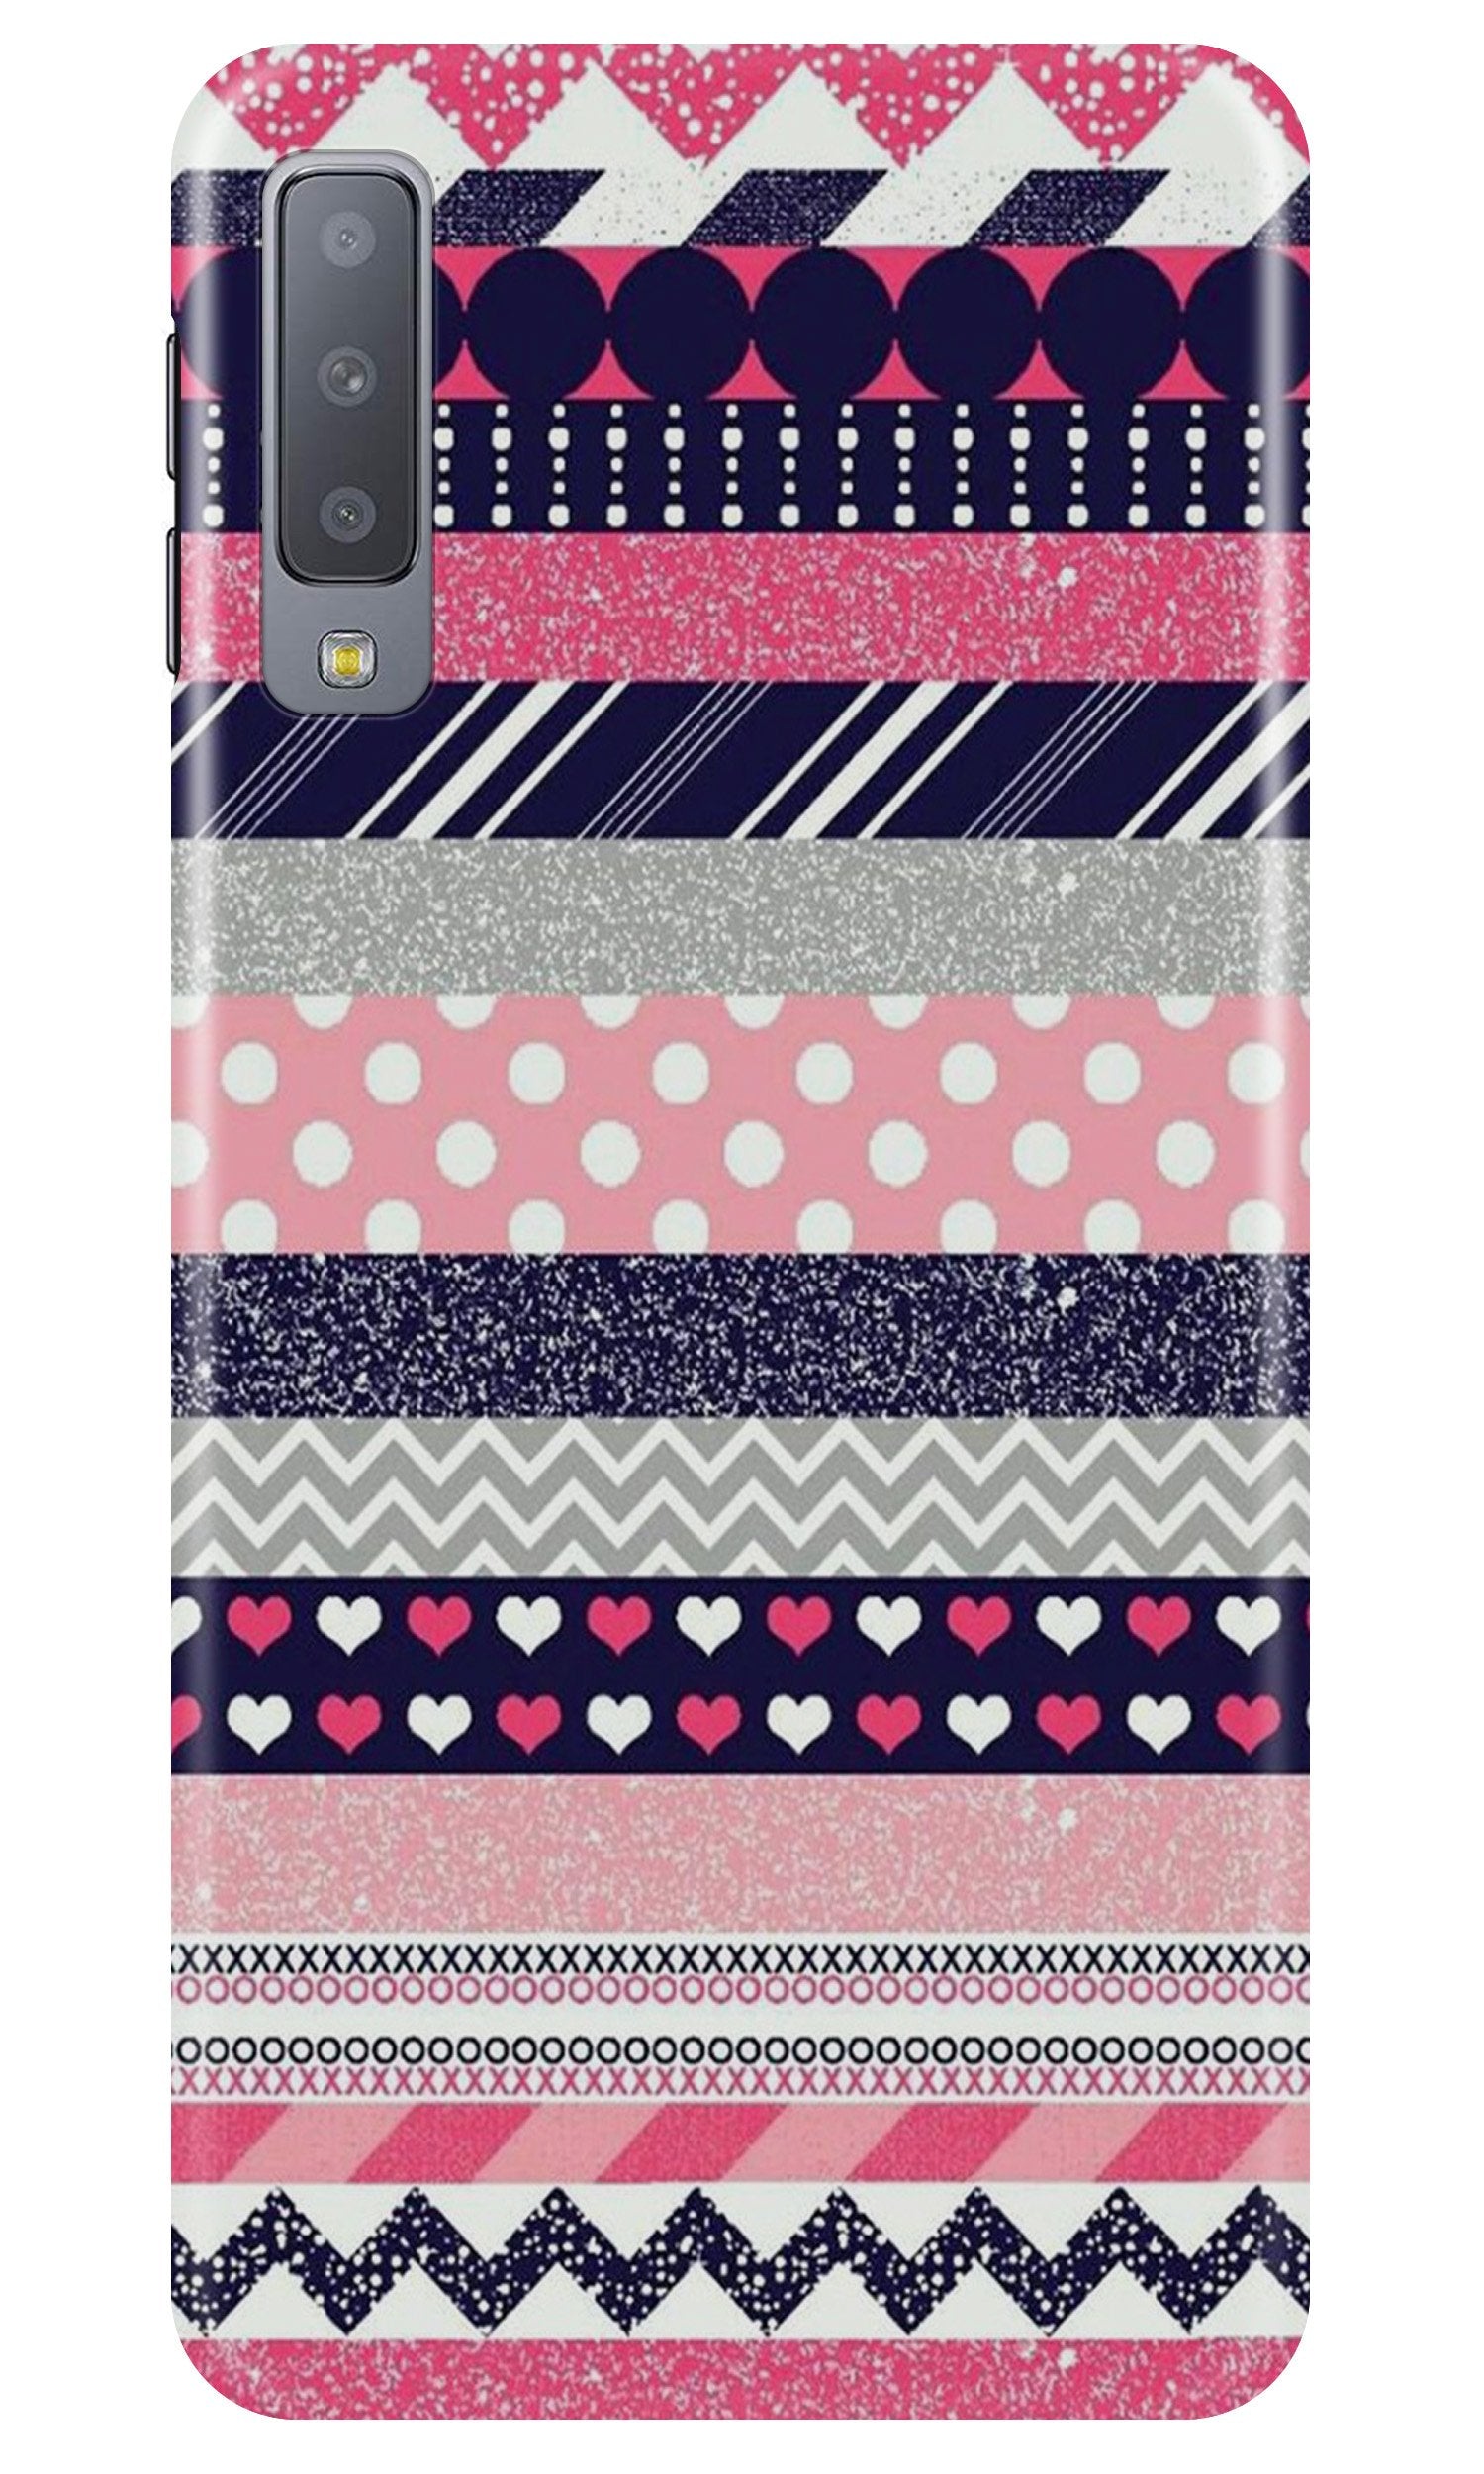 Pattern3 Case for Samung Galaxy A70s